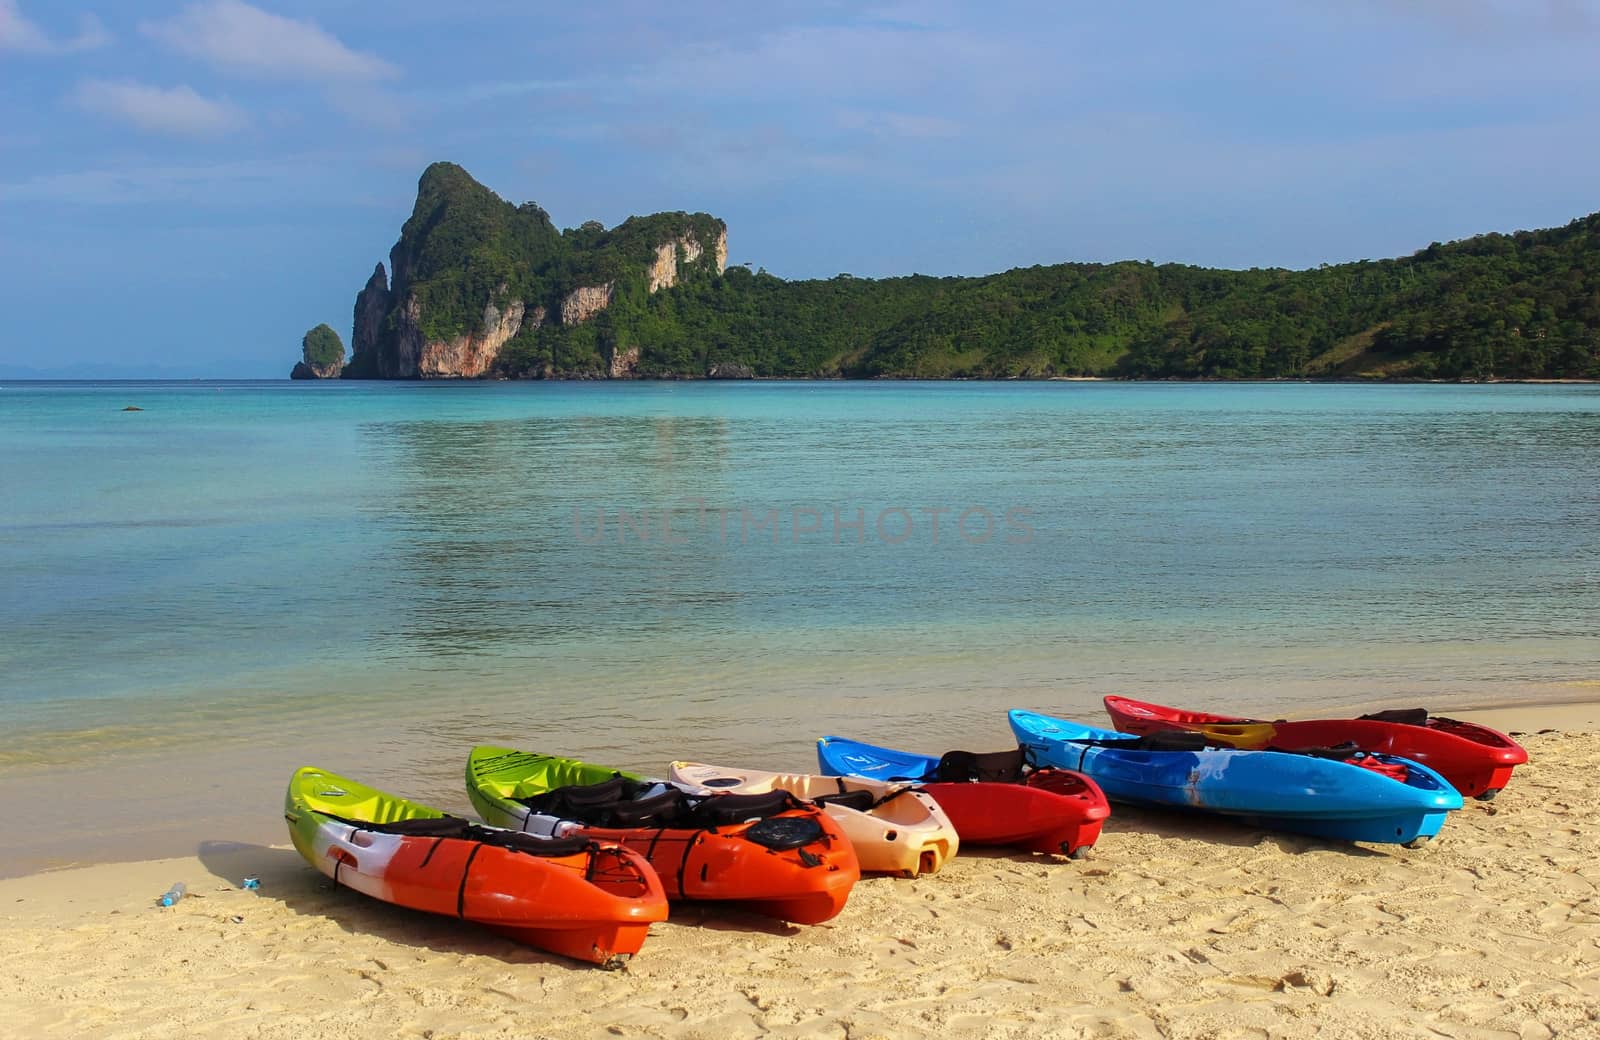 Kayaks canoe boats on the beach during sunny day by evolutionnow